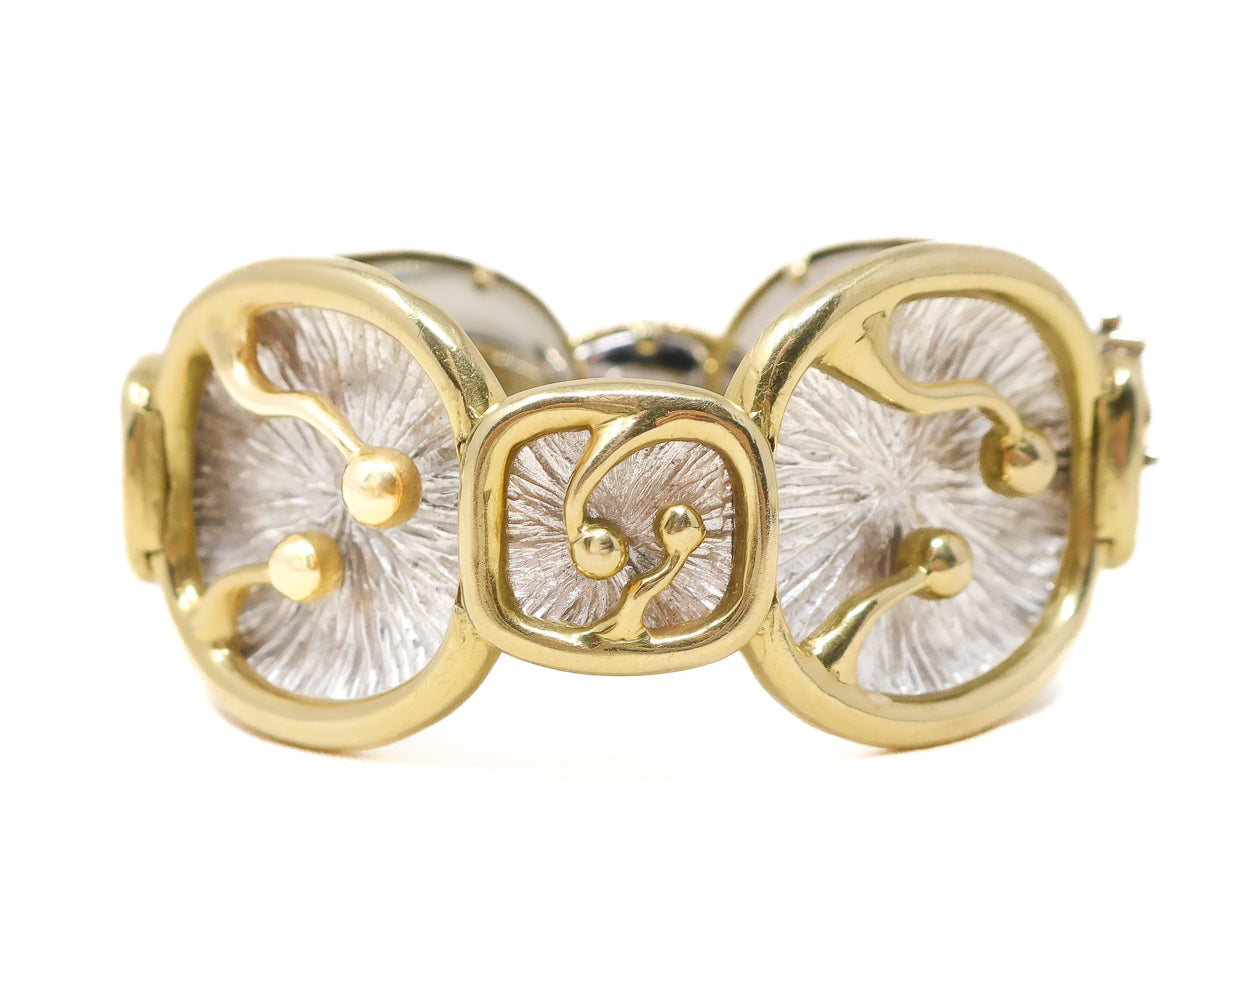 Late-Midcentury 18KT Two-Tone Gold Bracelet